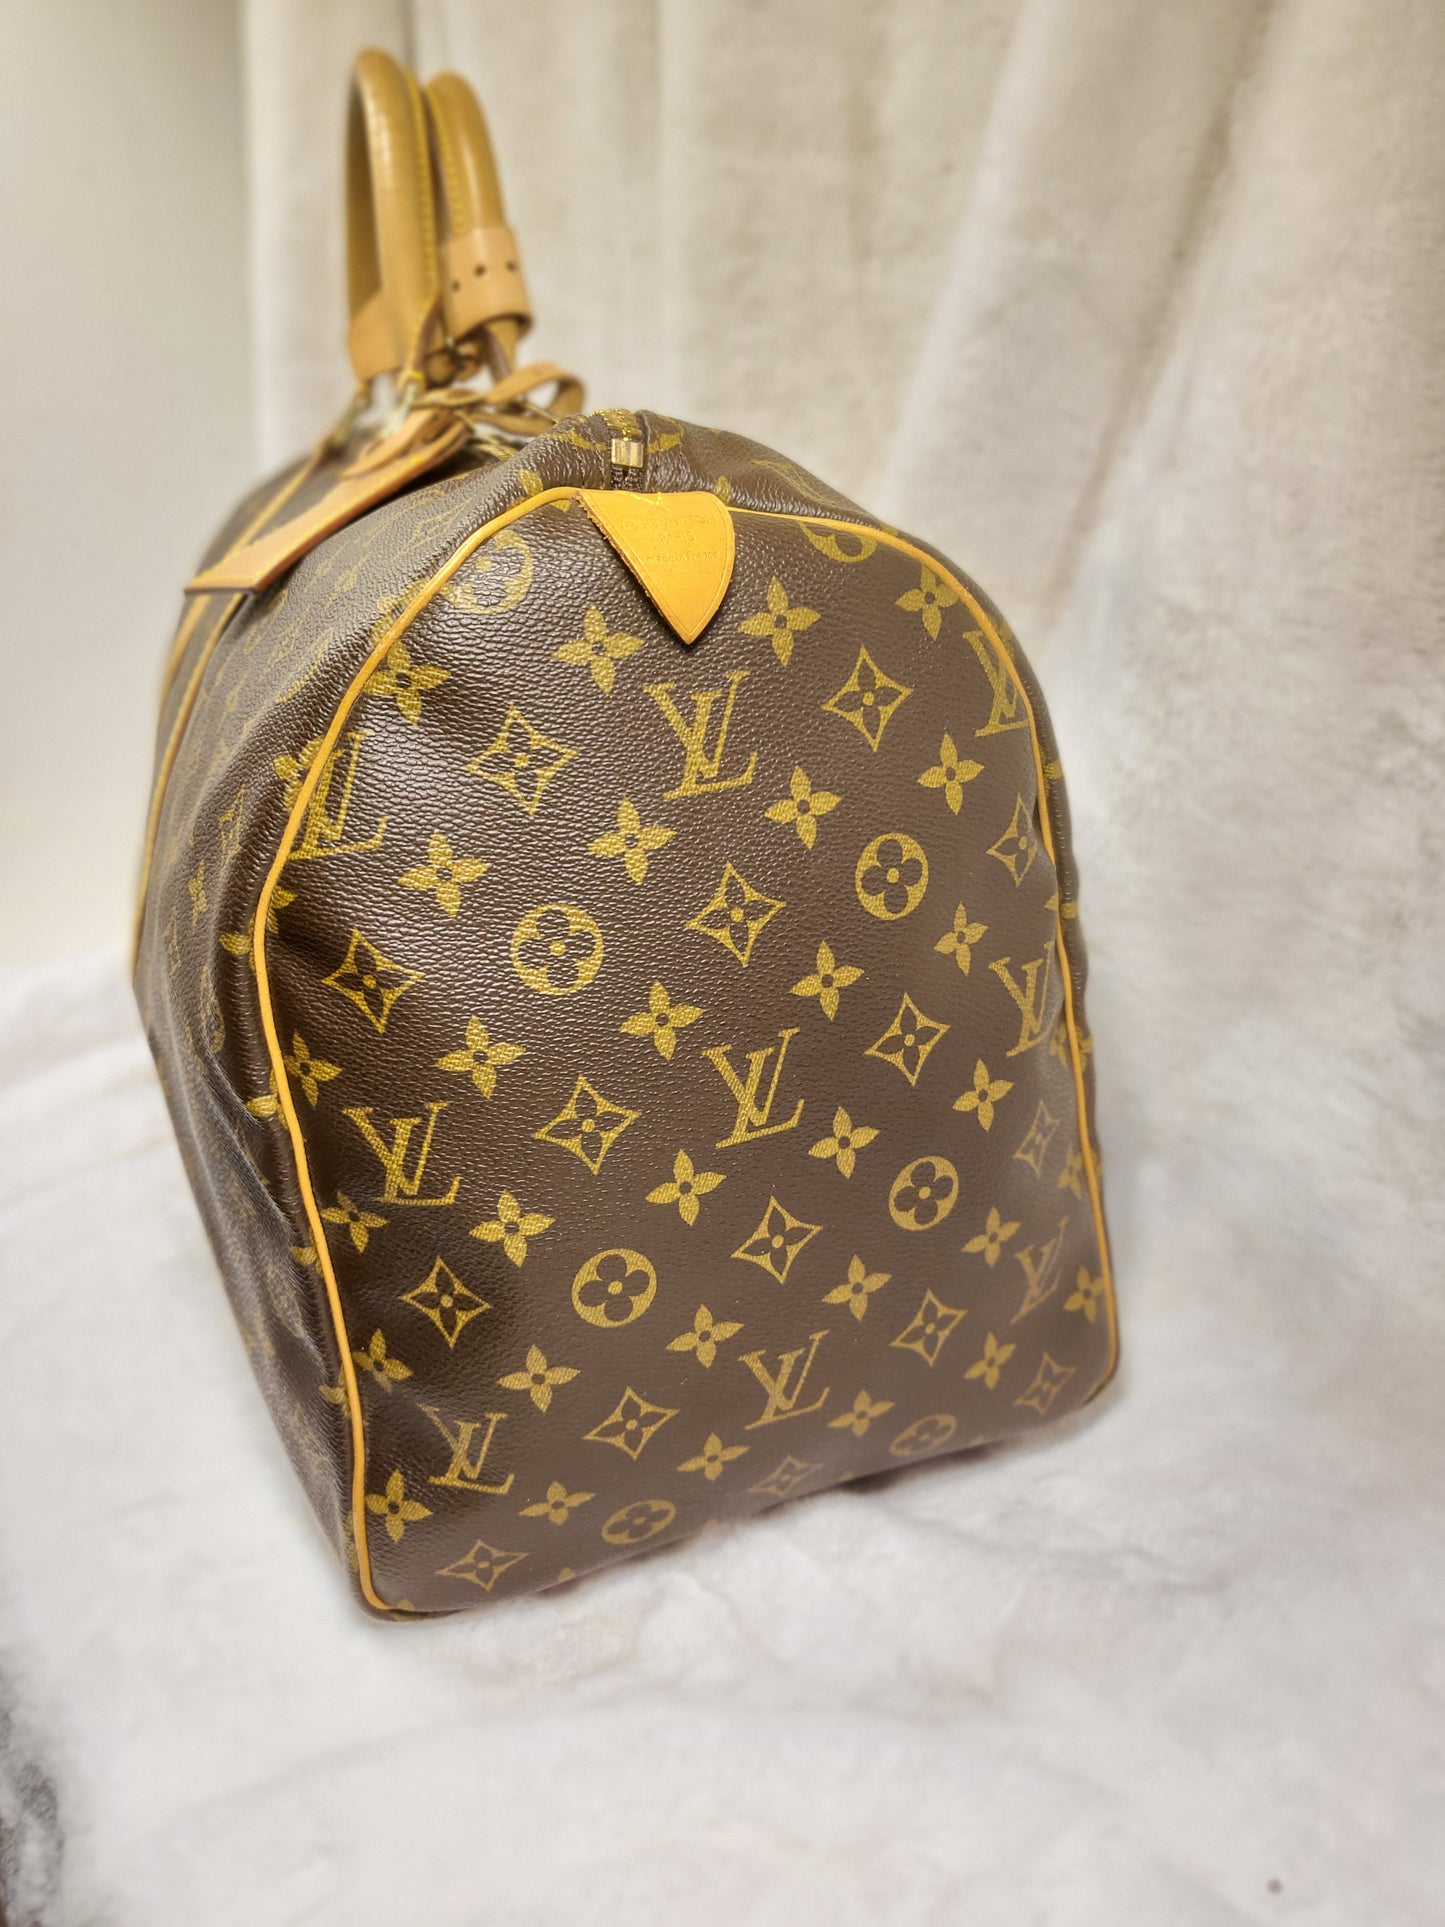 Authentic pre-owned Louis Vuitton Keepall 50 duffel travel bag